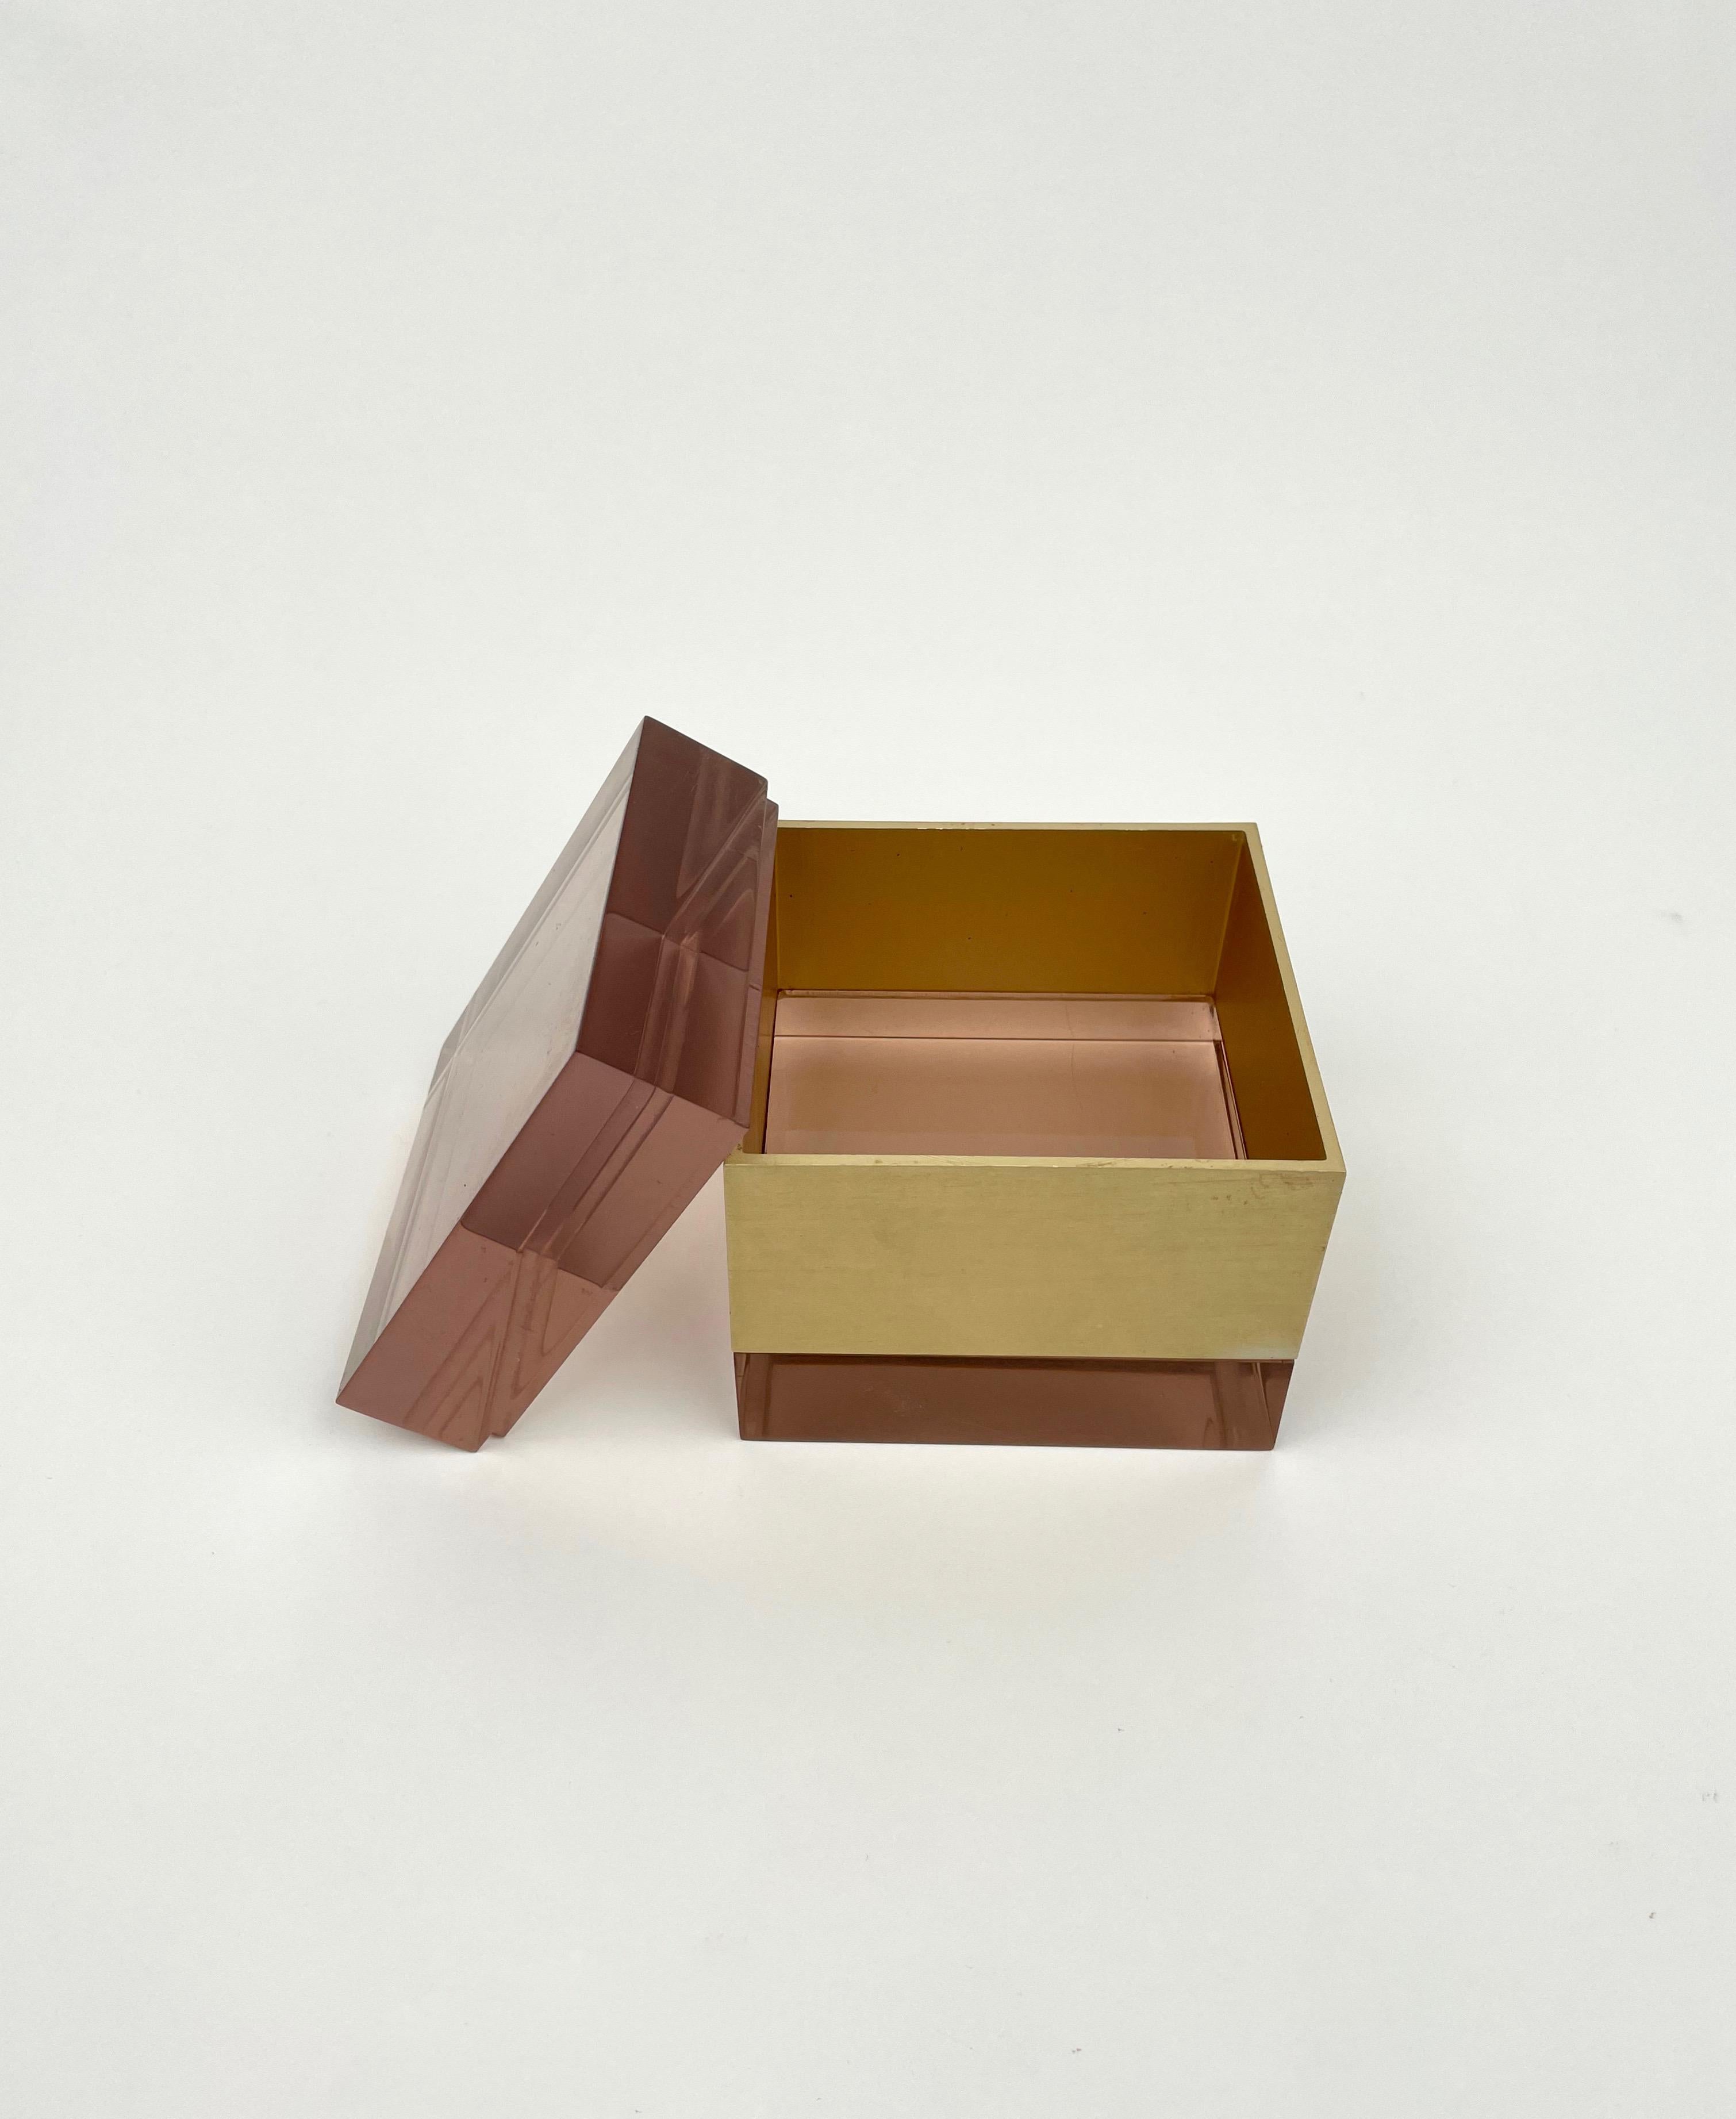 Alessandro Albrizzi Cube Box in Purple Lucite and Gold Metal, Italy, 1970s For Sale 7